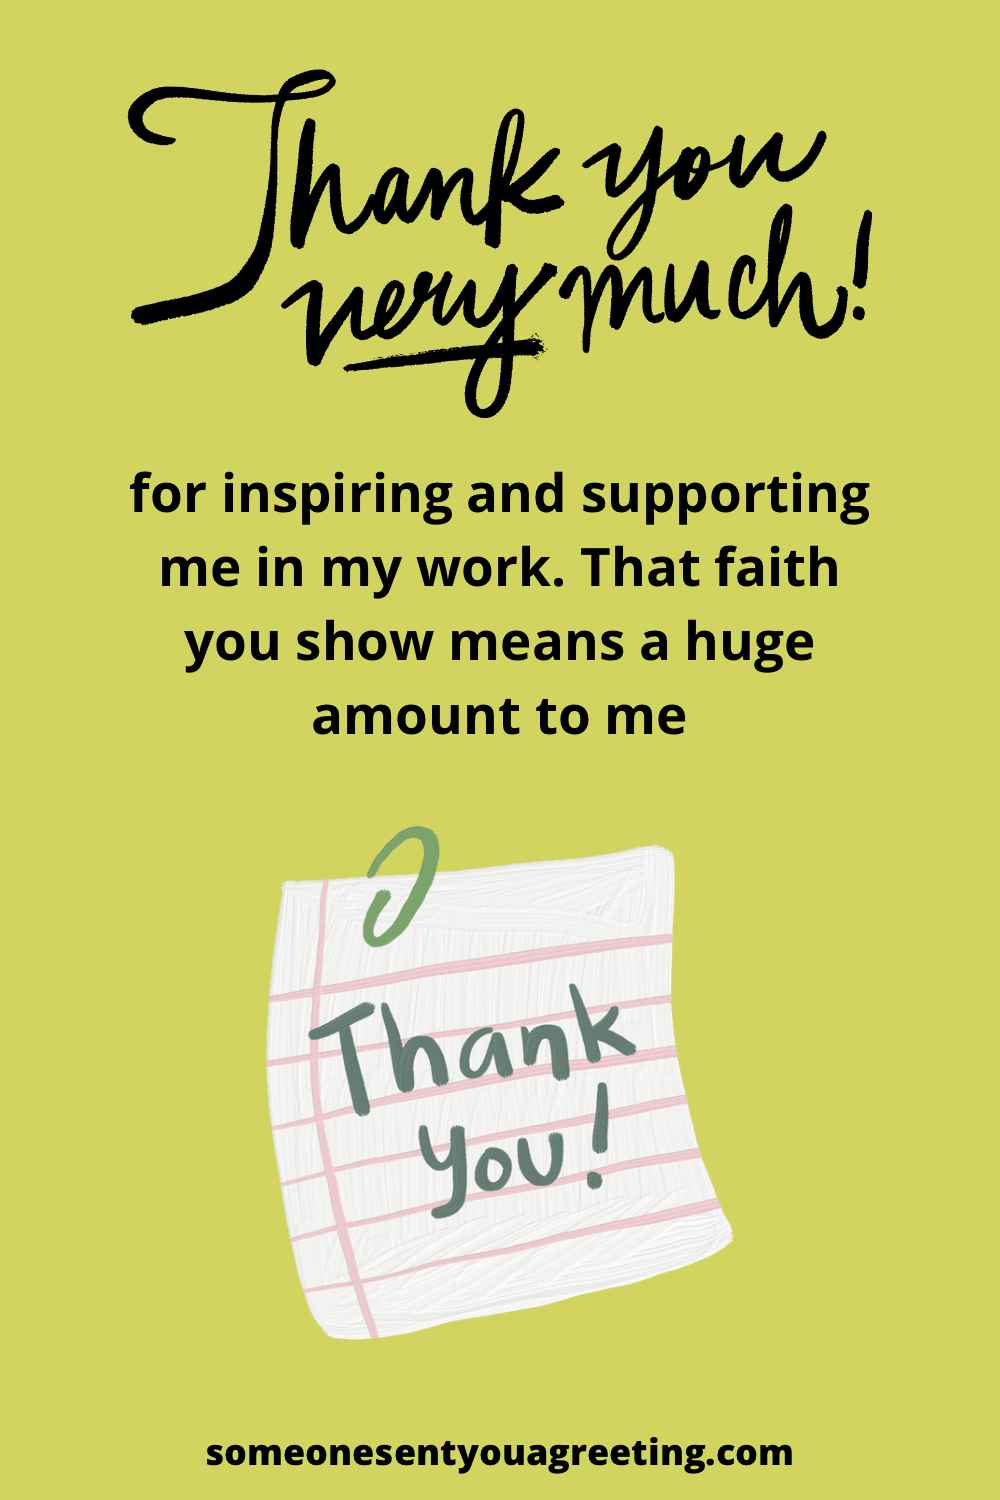 ways to say thank you for your support at work